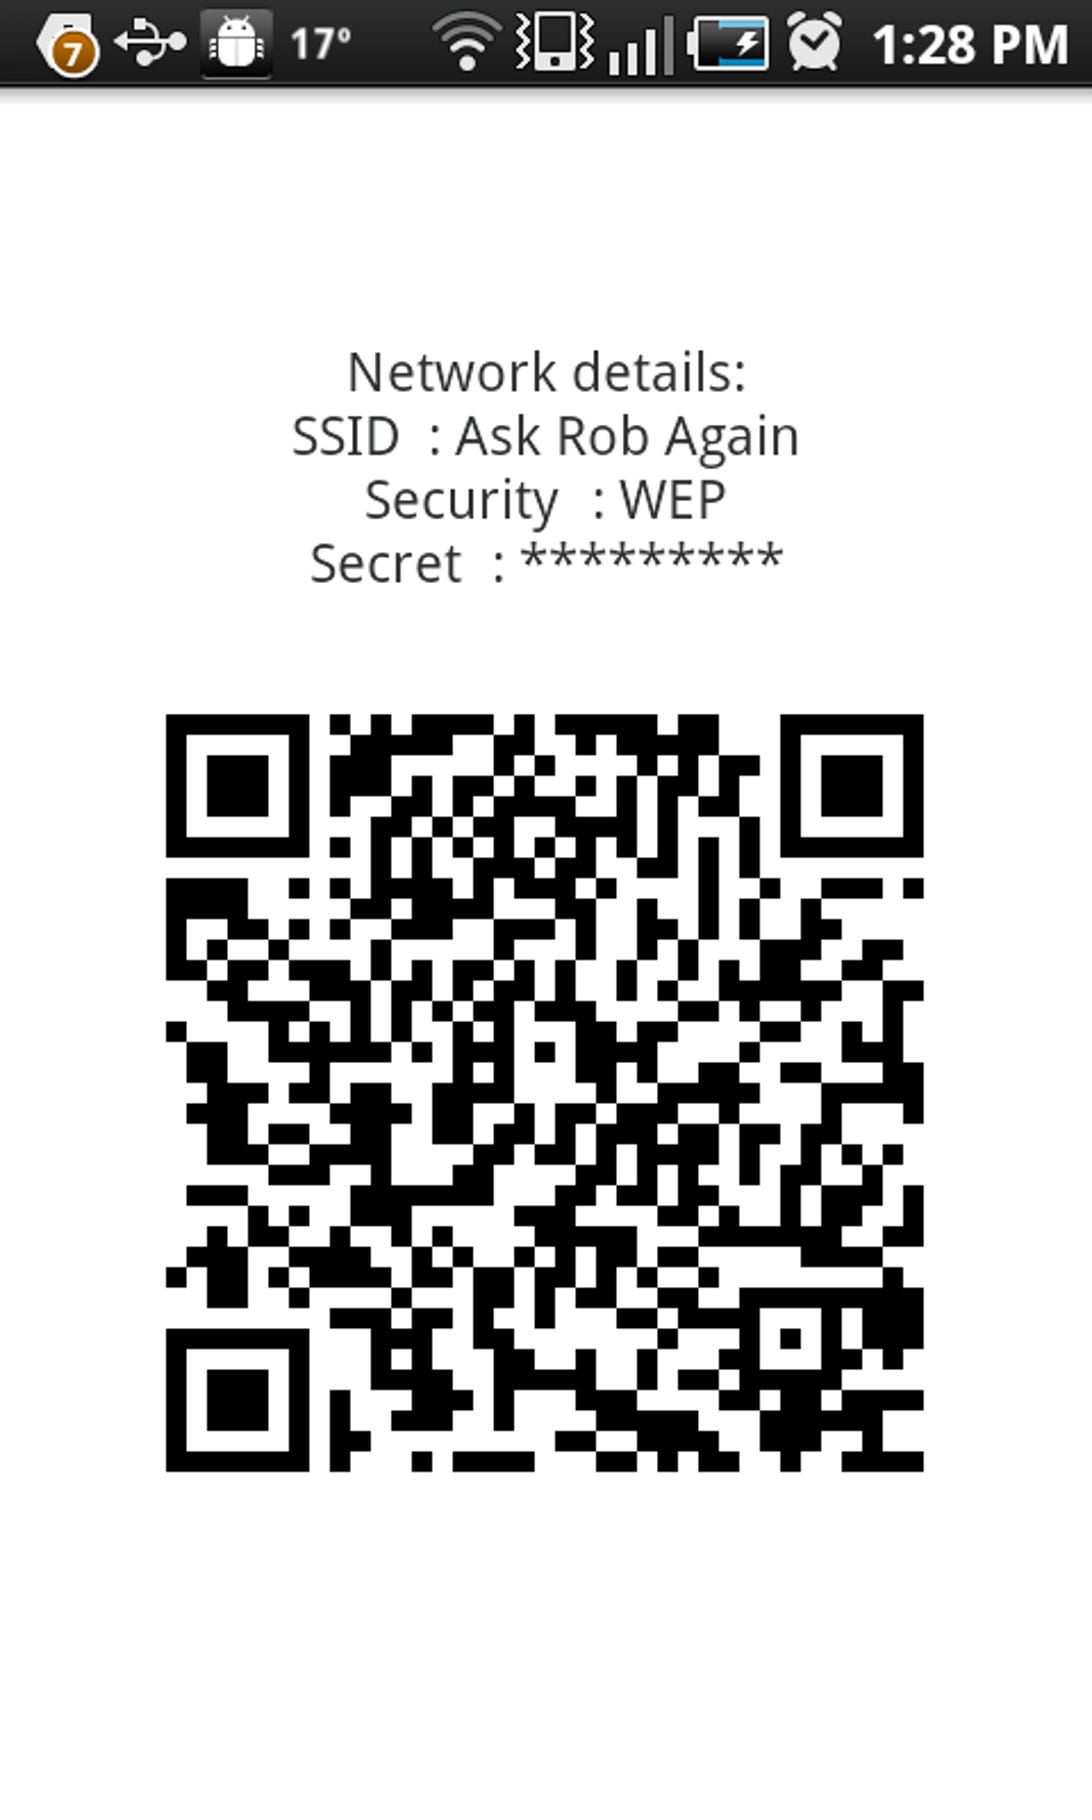 Step 4: Share your QR code.